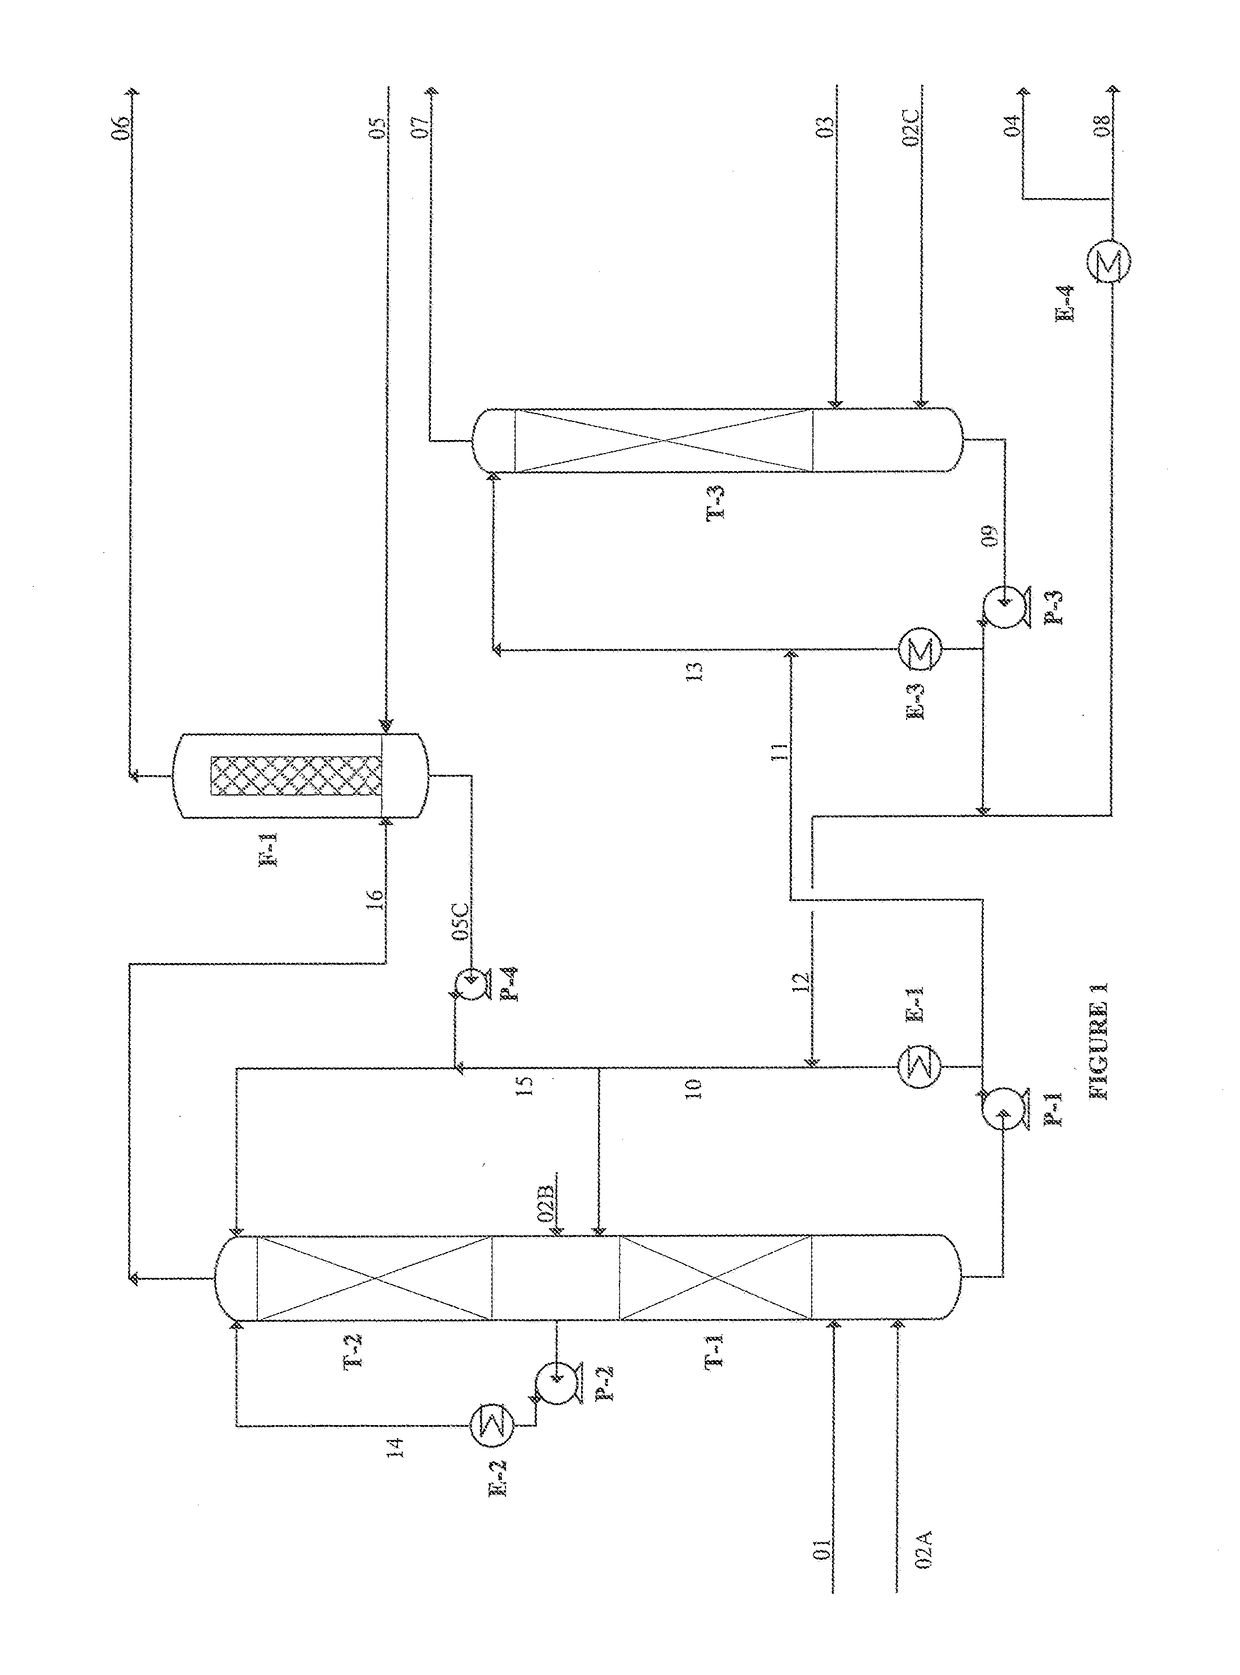 Sulfur dioxide scrubbing system and process for producing potassium products